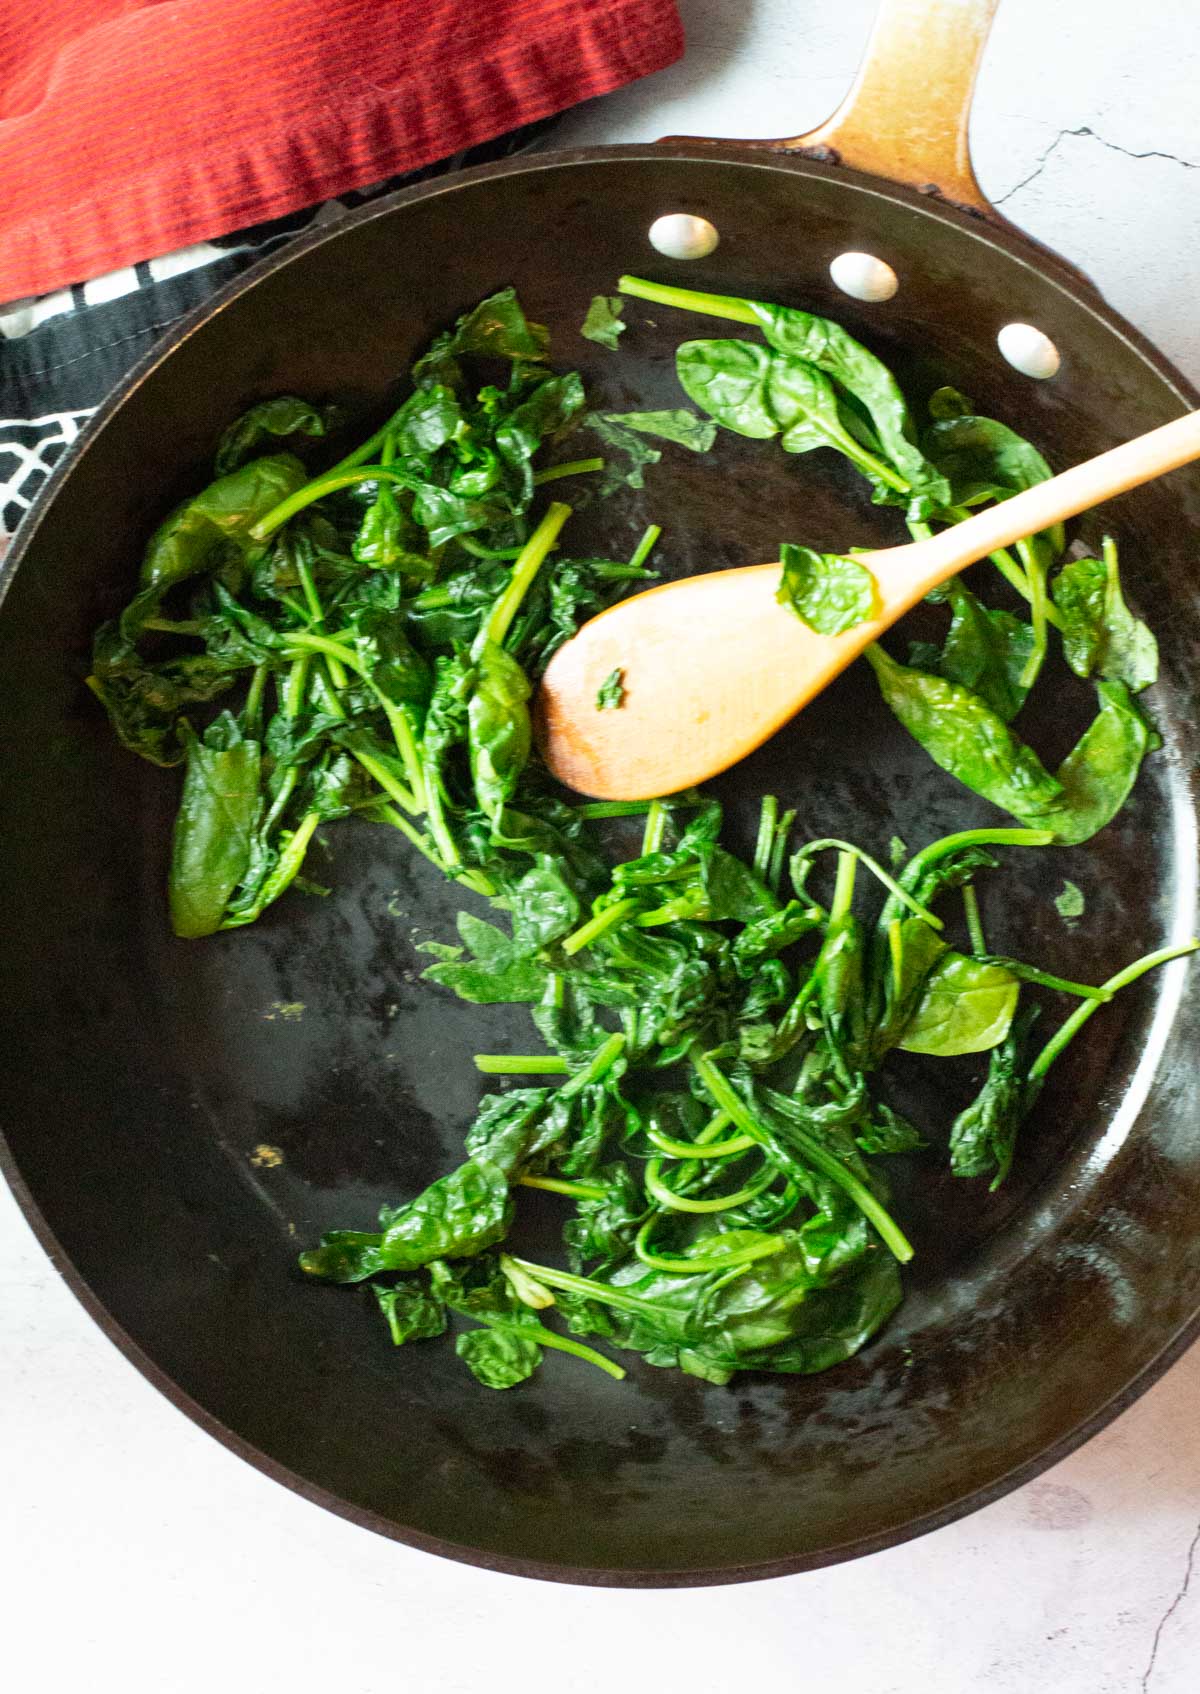 Cooking spinach to make Stuffed Italian Peppers